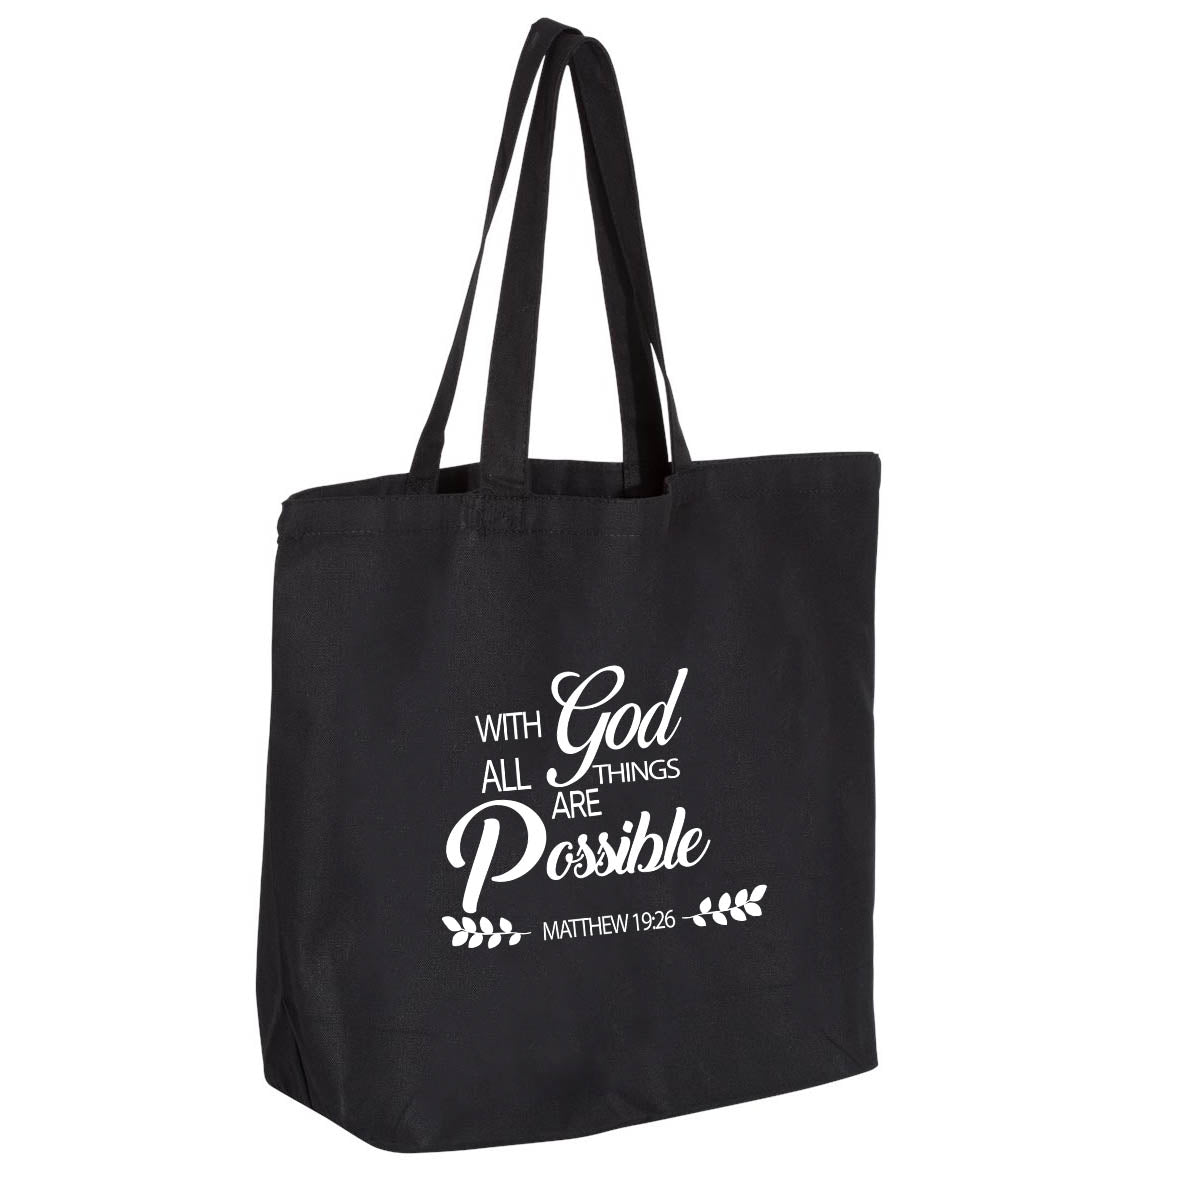 All Things Are Possible Jumbo Tote Canvas Bag